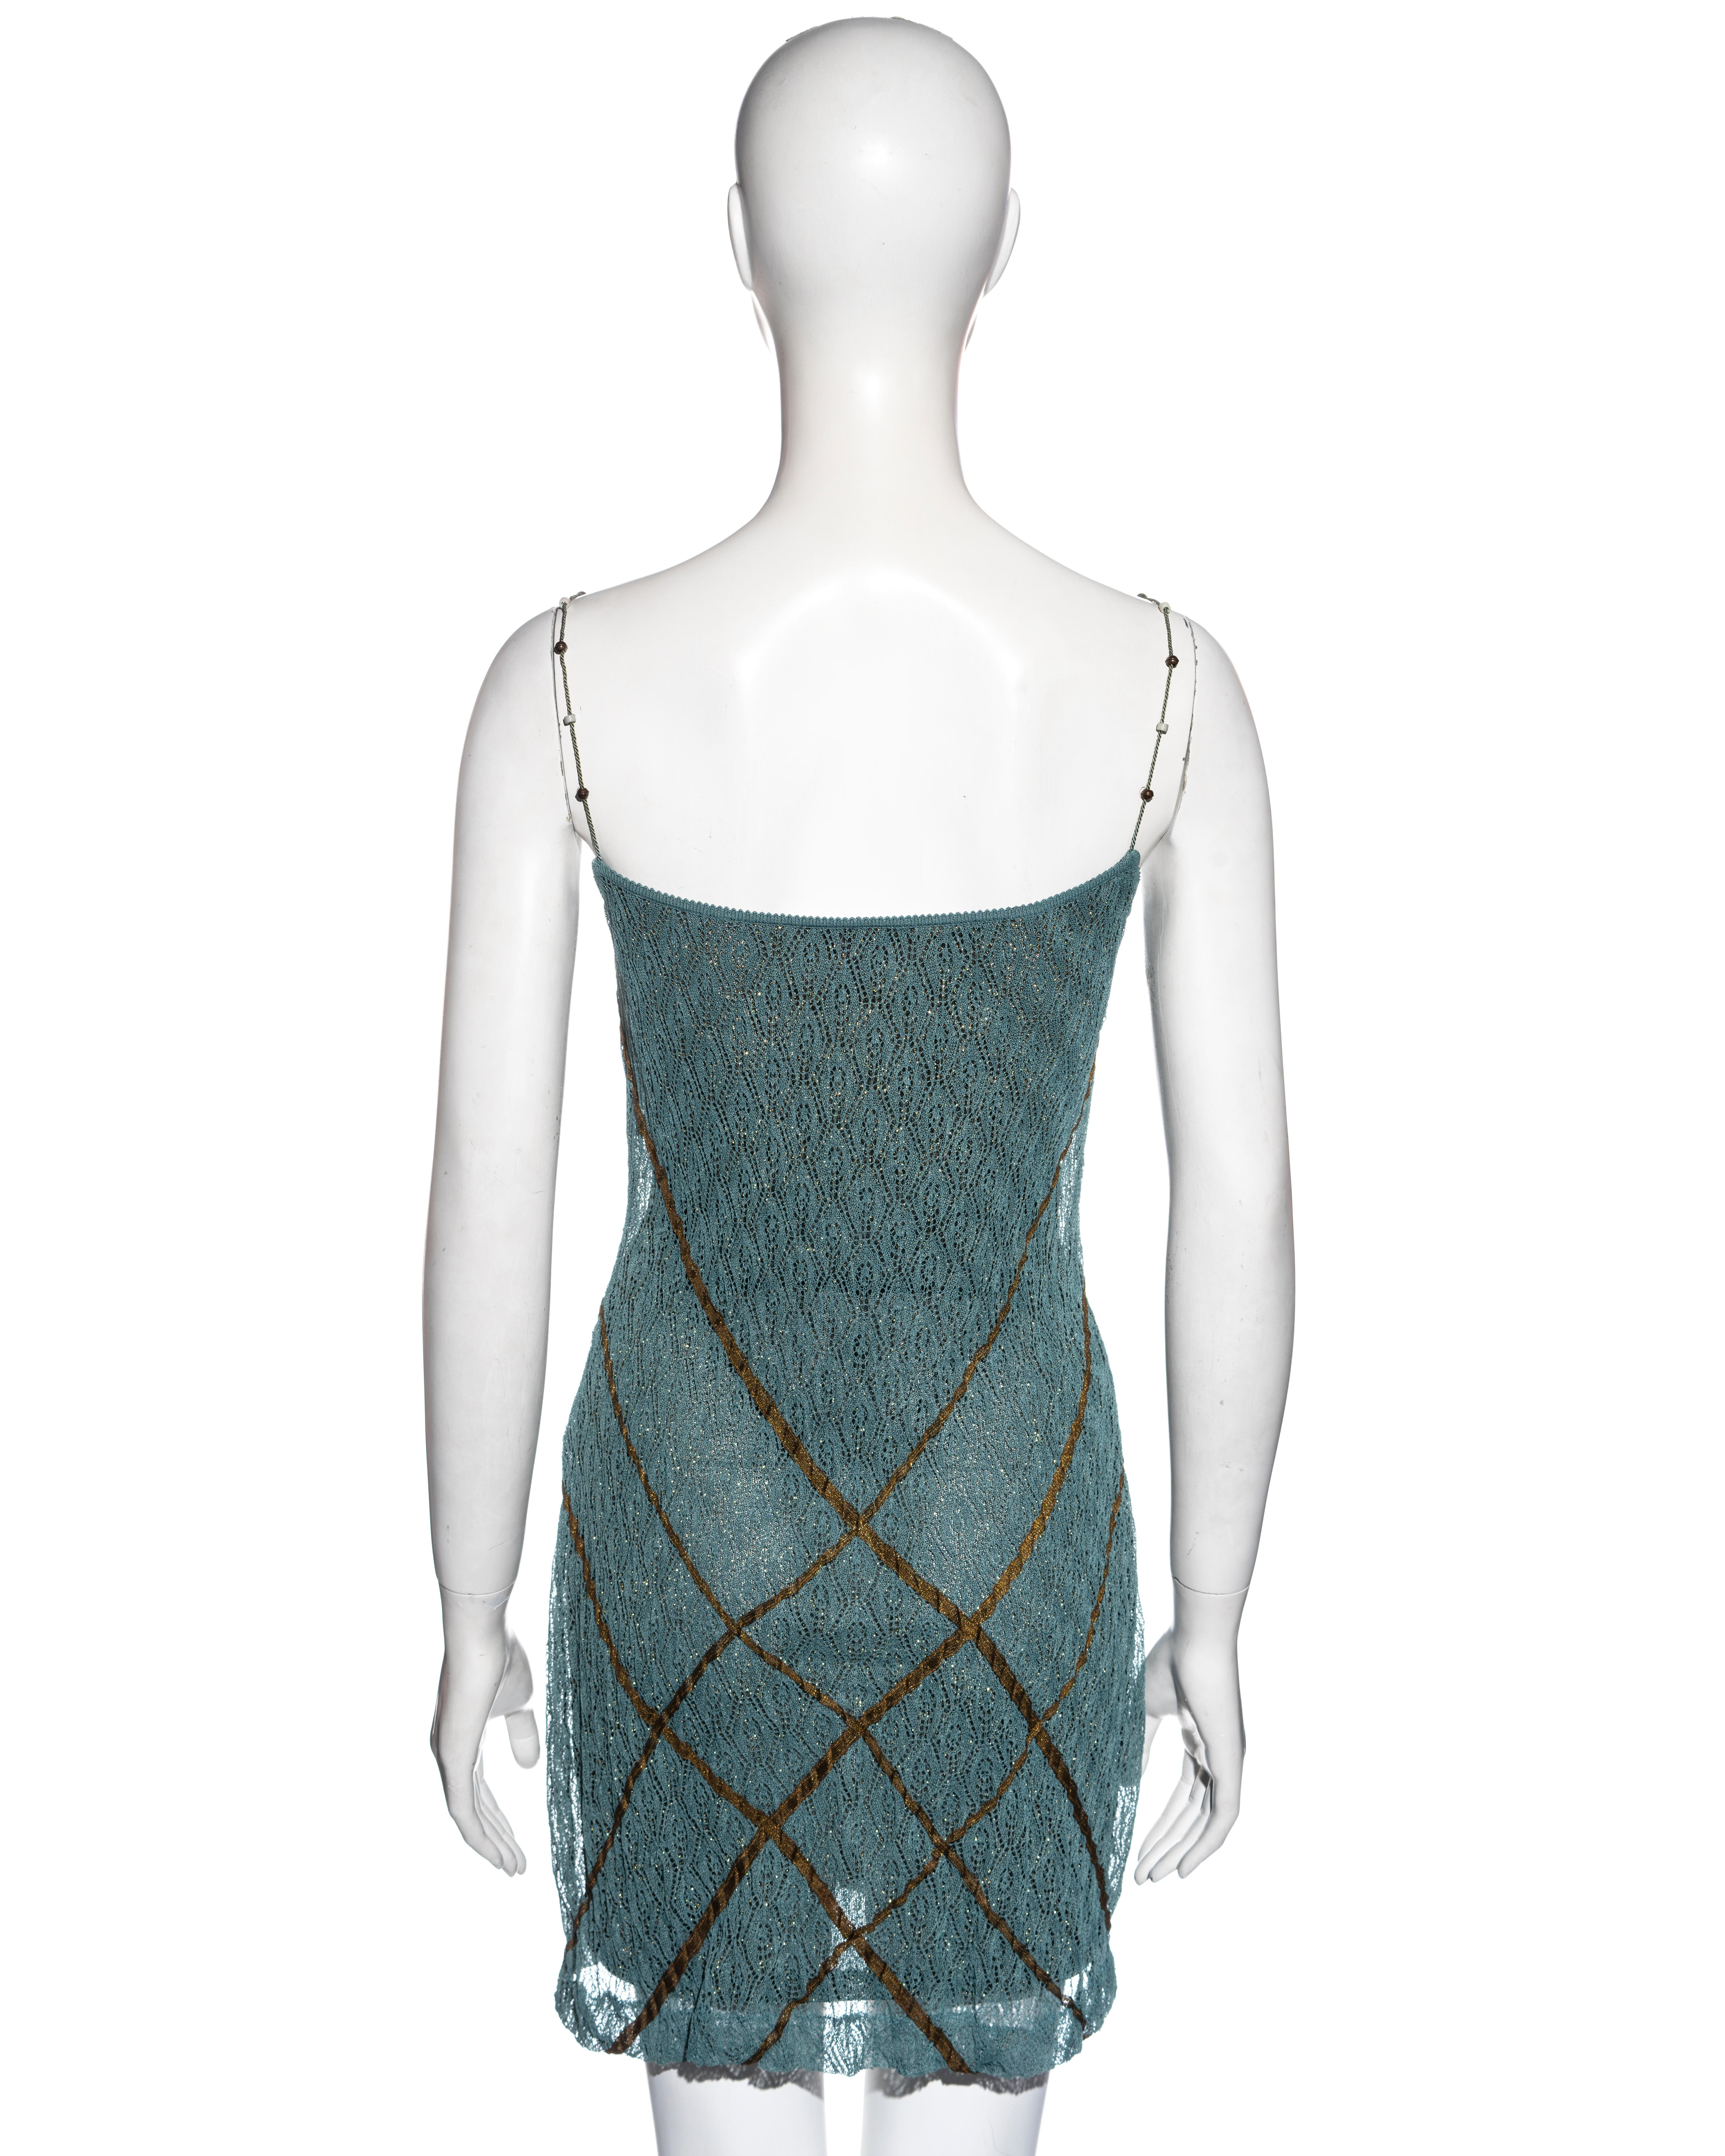 Christian Dior by John Galliano teal double-layered knitted lace dress, ss 1999 For Sale 3